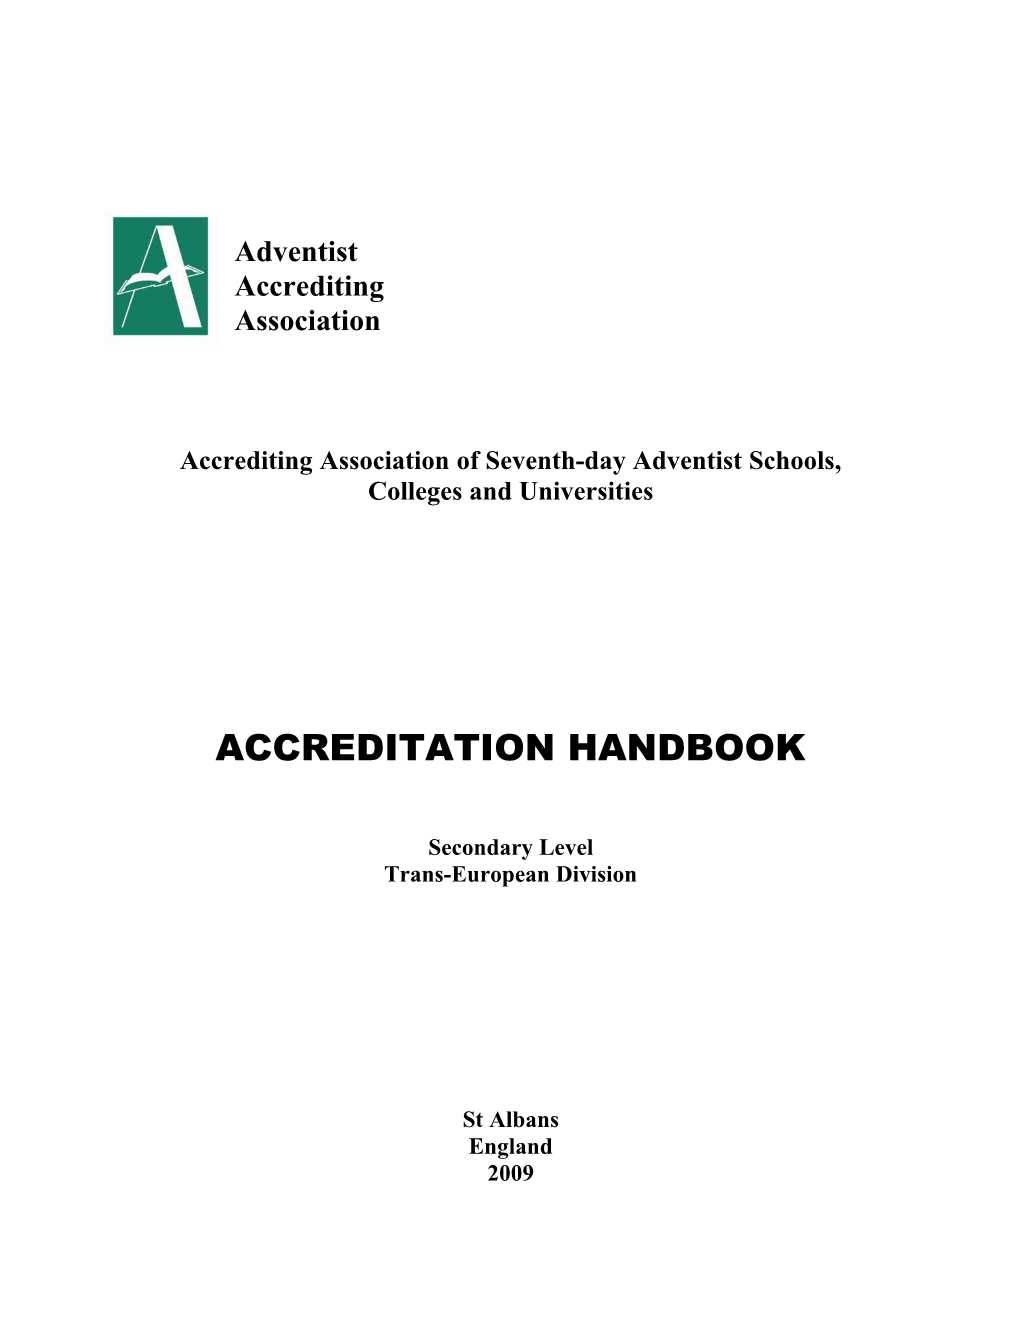 Accrediting Association of Seventh-Day Adventist Schools